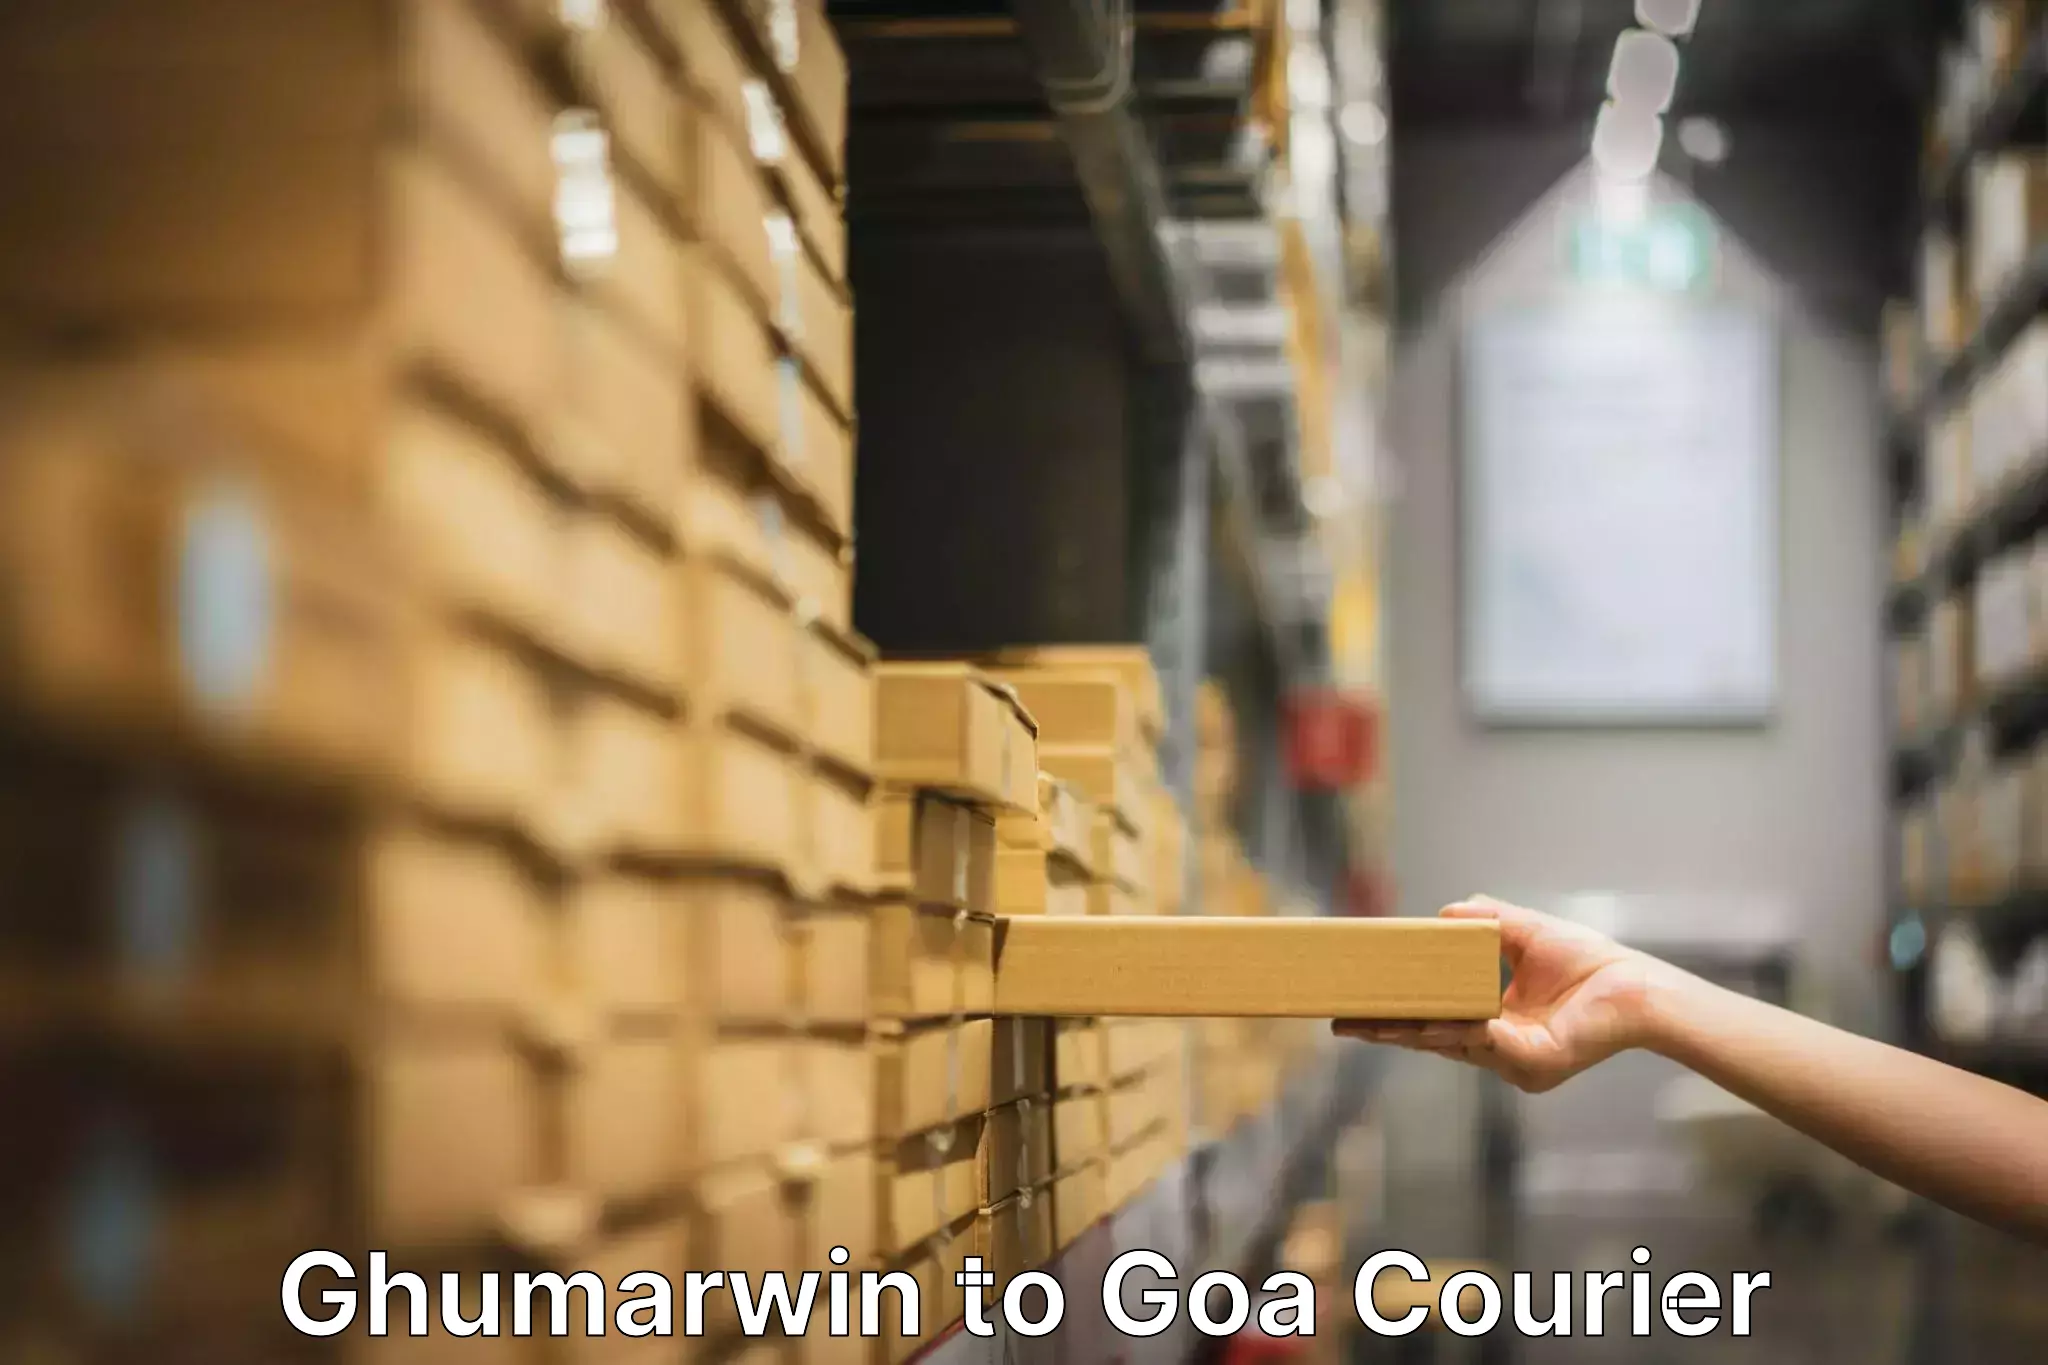 Furniture moving specialists in Ghumarwin to Goa